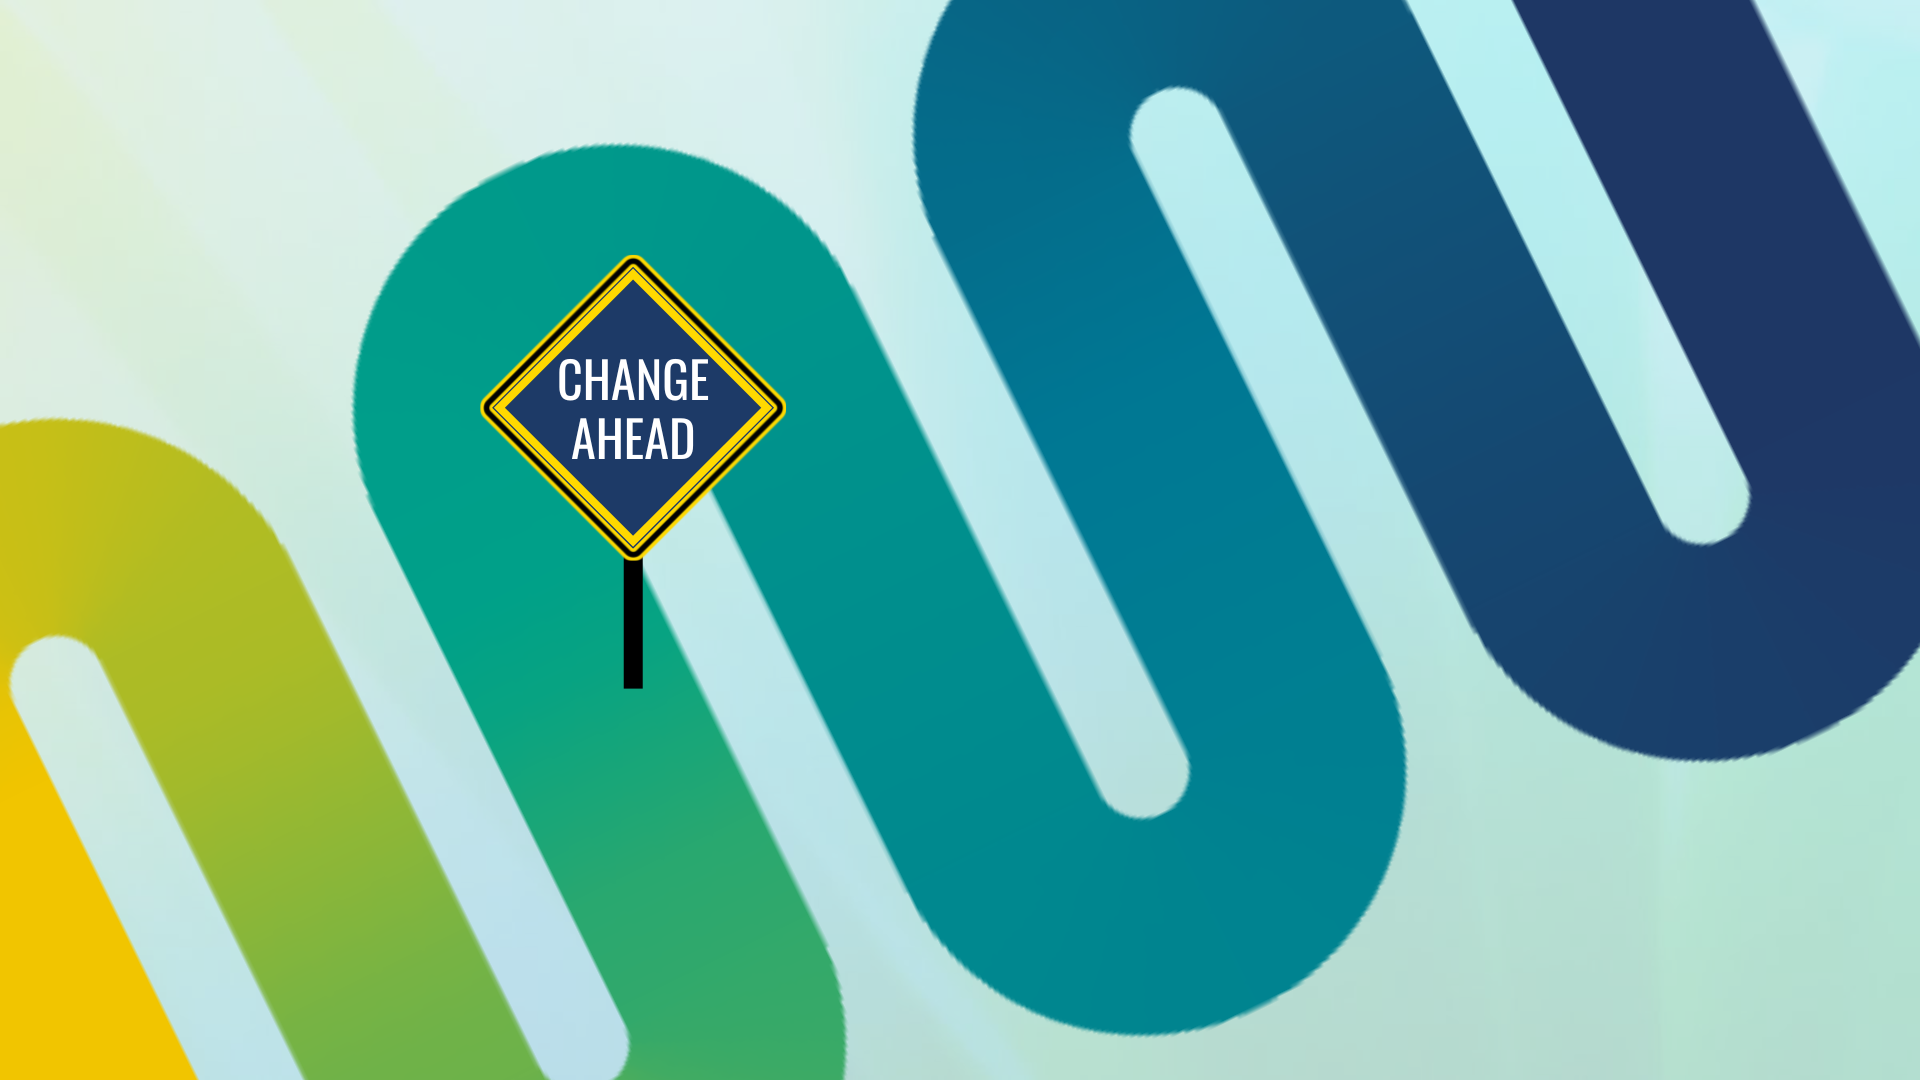 change ahead road sign against Mobility Network chicane background